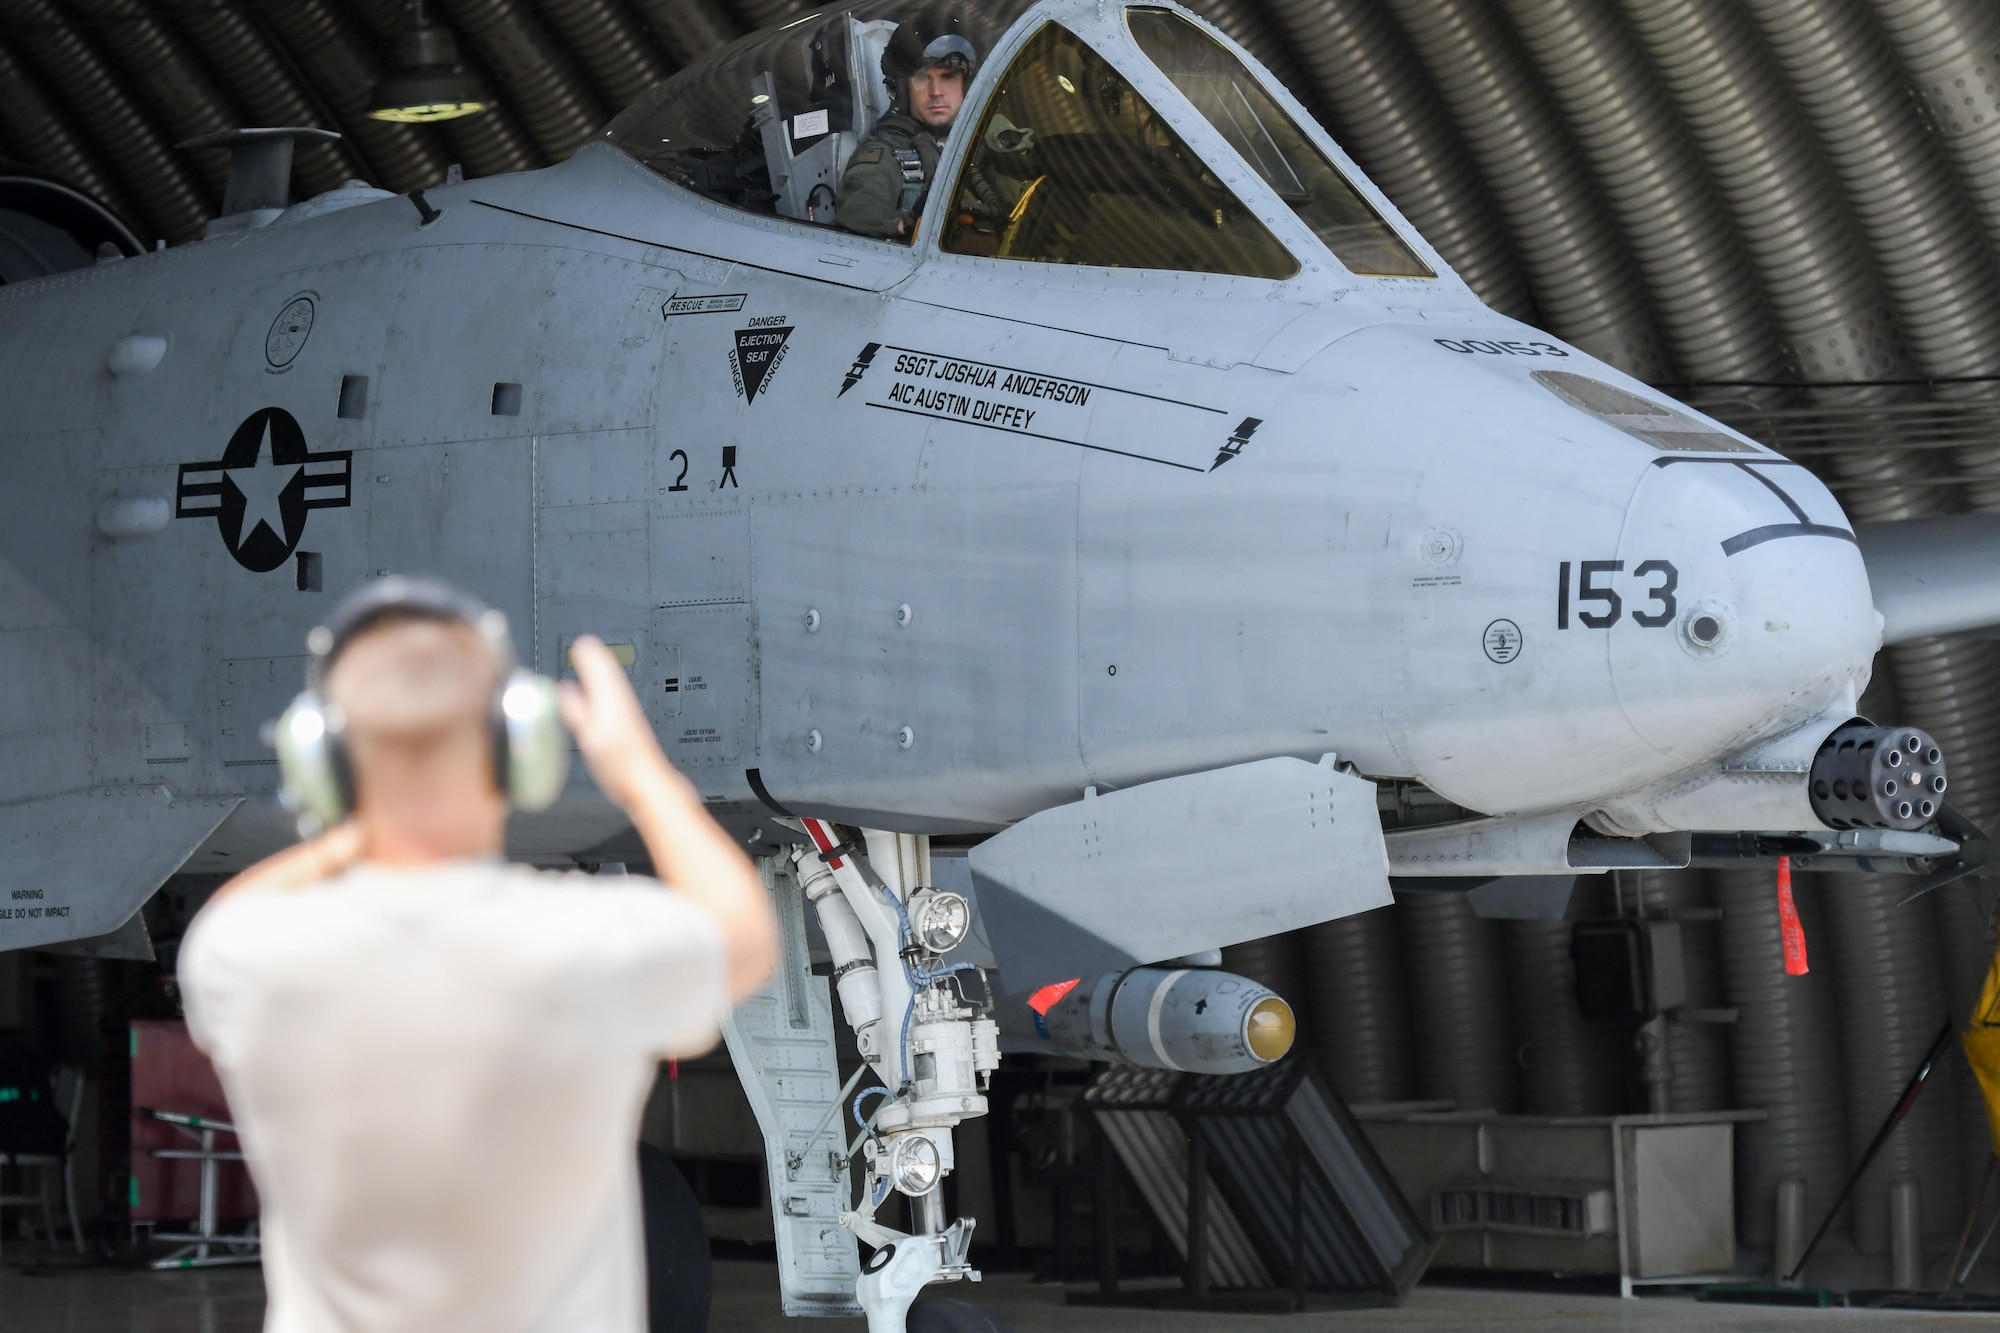 Airman Weston Meyer, 25th Aircraft Maintenance Unit crew chief, marshals an A-10 Thunderbolt II from the 25th Fighter Squadron before a combat search and rescue exercise flight at Osan Air Base, Republic of Korea, July 19, 2016. The CSAR flight is part of Exercise Pacific Thunder 16-2, a combined training event designed to enhance the readiness of U.S. and ROK forces to defend the Korean peninsula by sustaining their capabilities.(U.S. Air Force photo by Staff Sgt. Jonathan Steffen/Released)